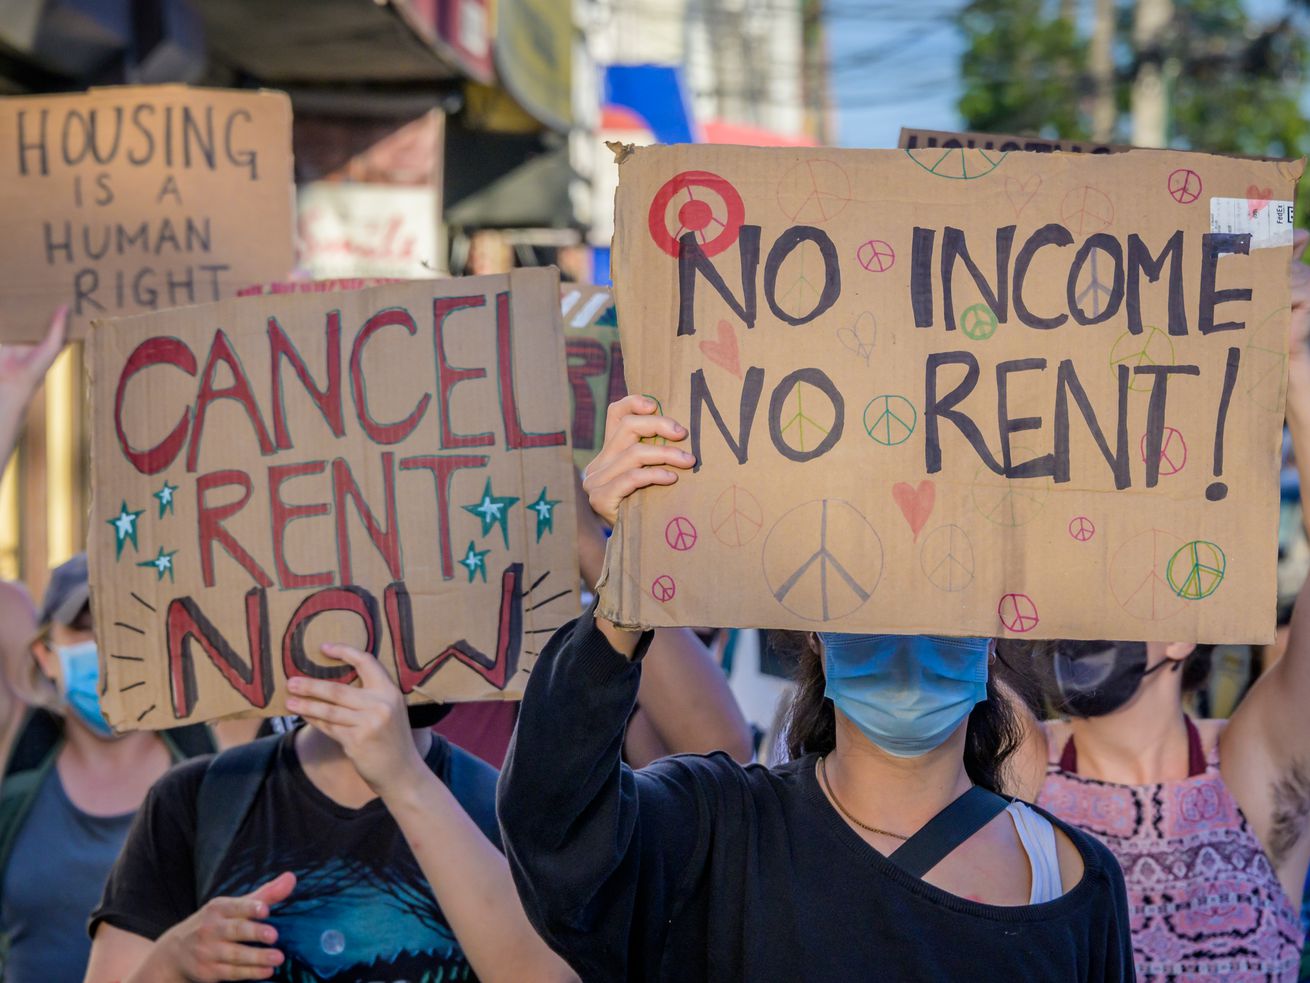 New Yorkers carrying signs painted with “Cancel Rent Now” and “No Income No Relief” during a Brooklyn protest.